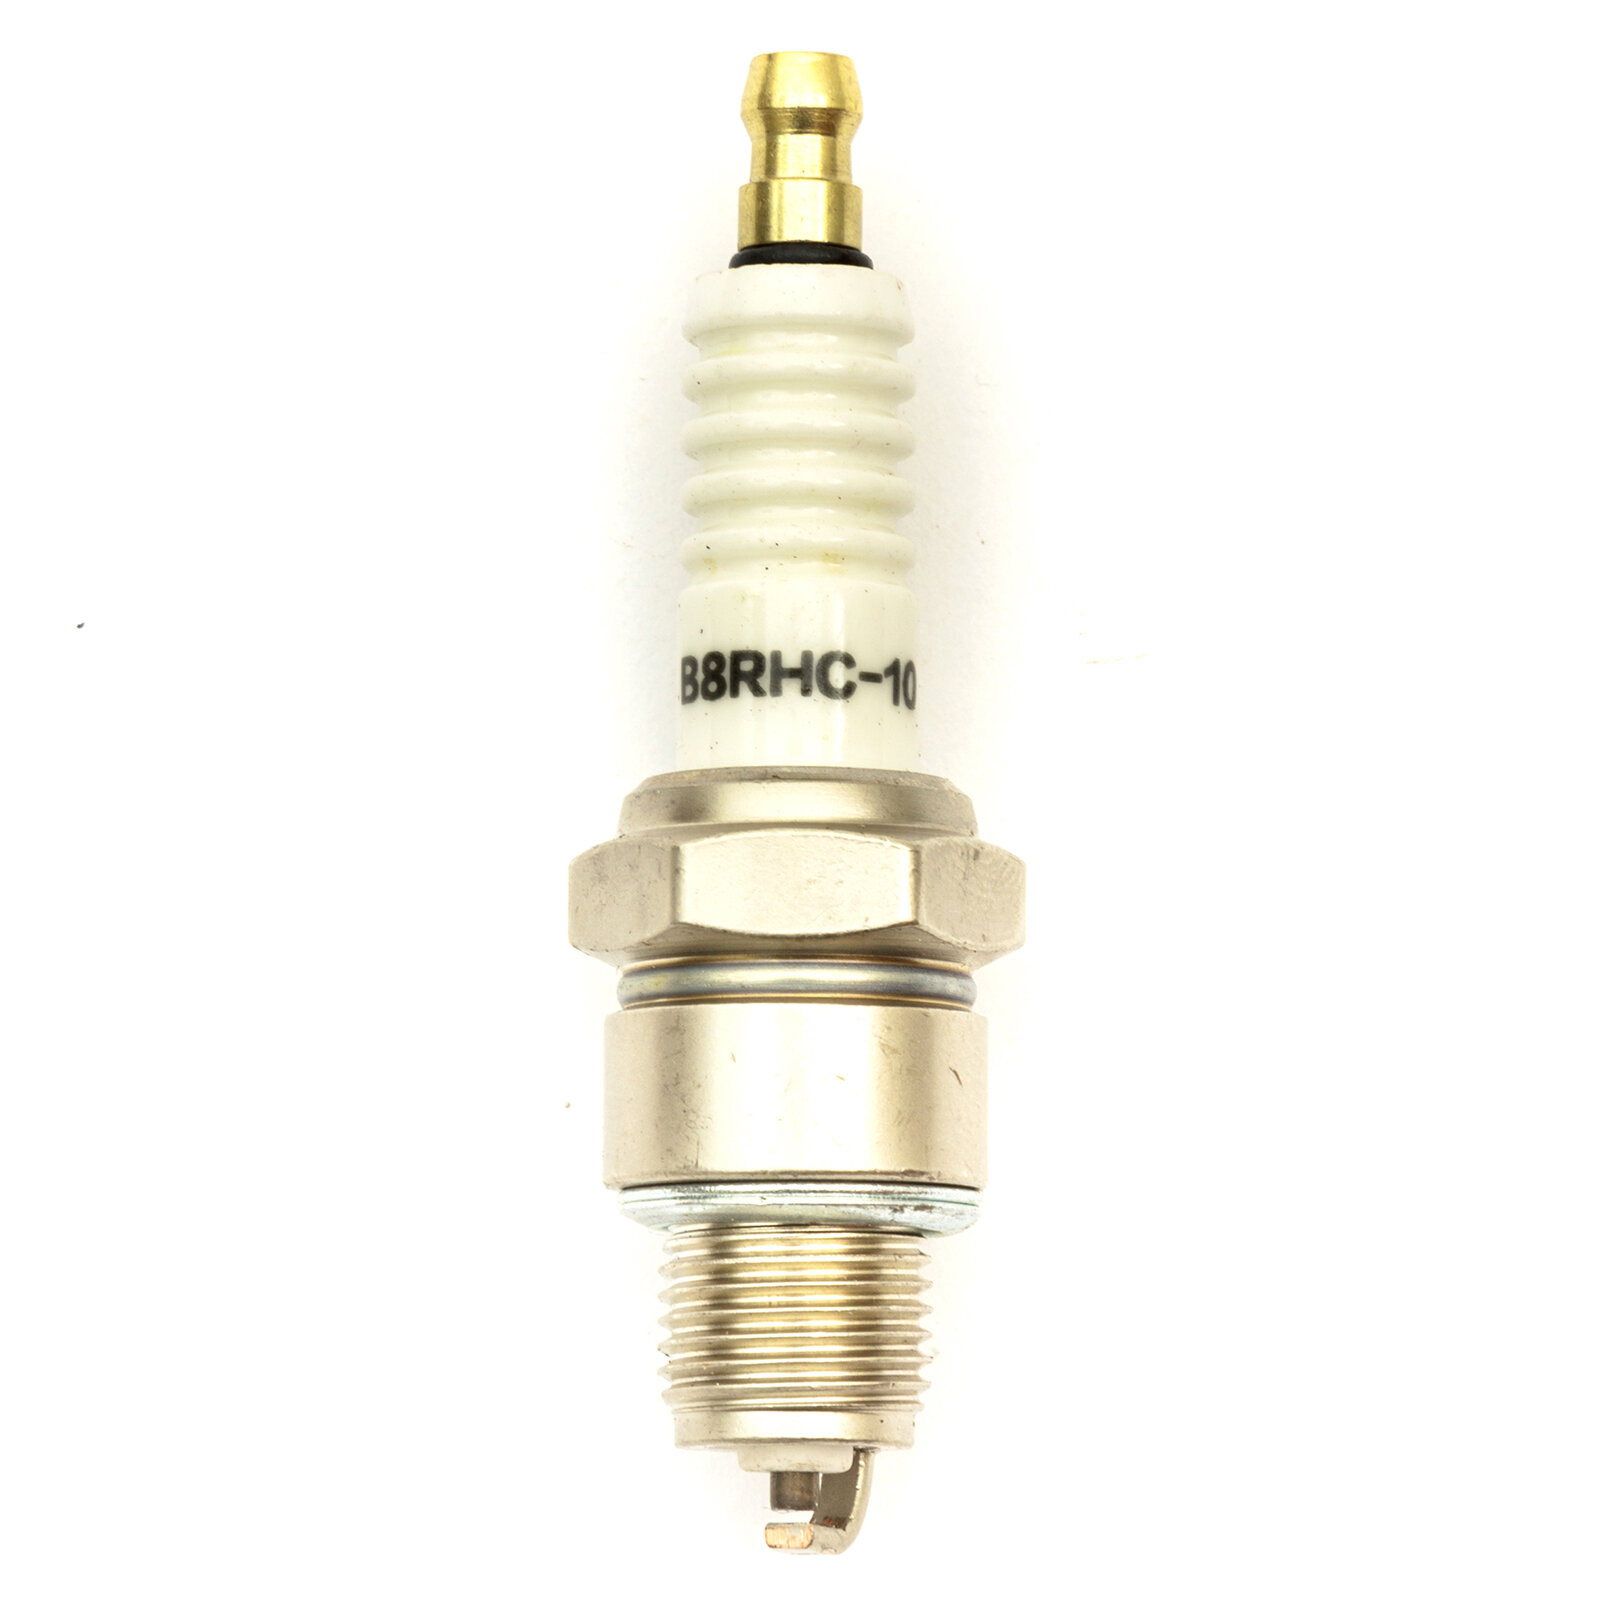 Torch Takumi Spark Plug Replace NGK BR8HS-10 Fits Suzuki DT55 Outboard Motor